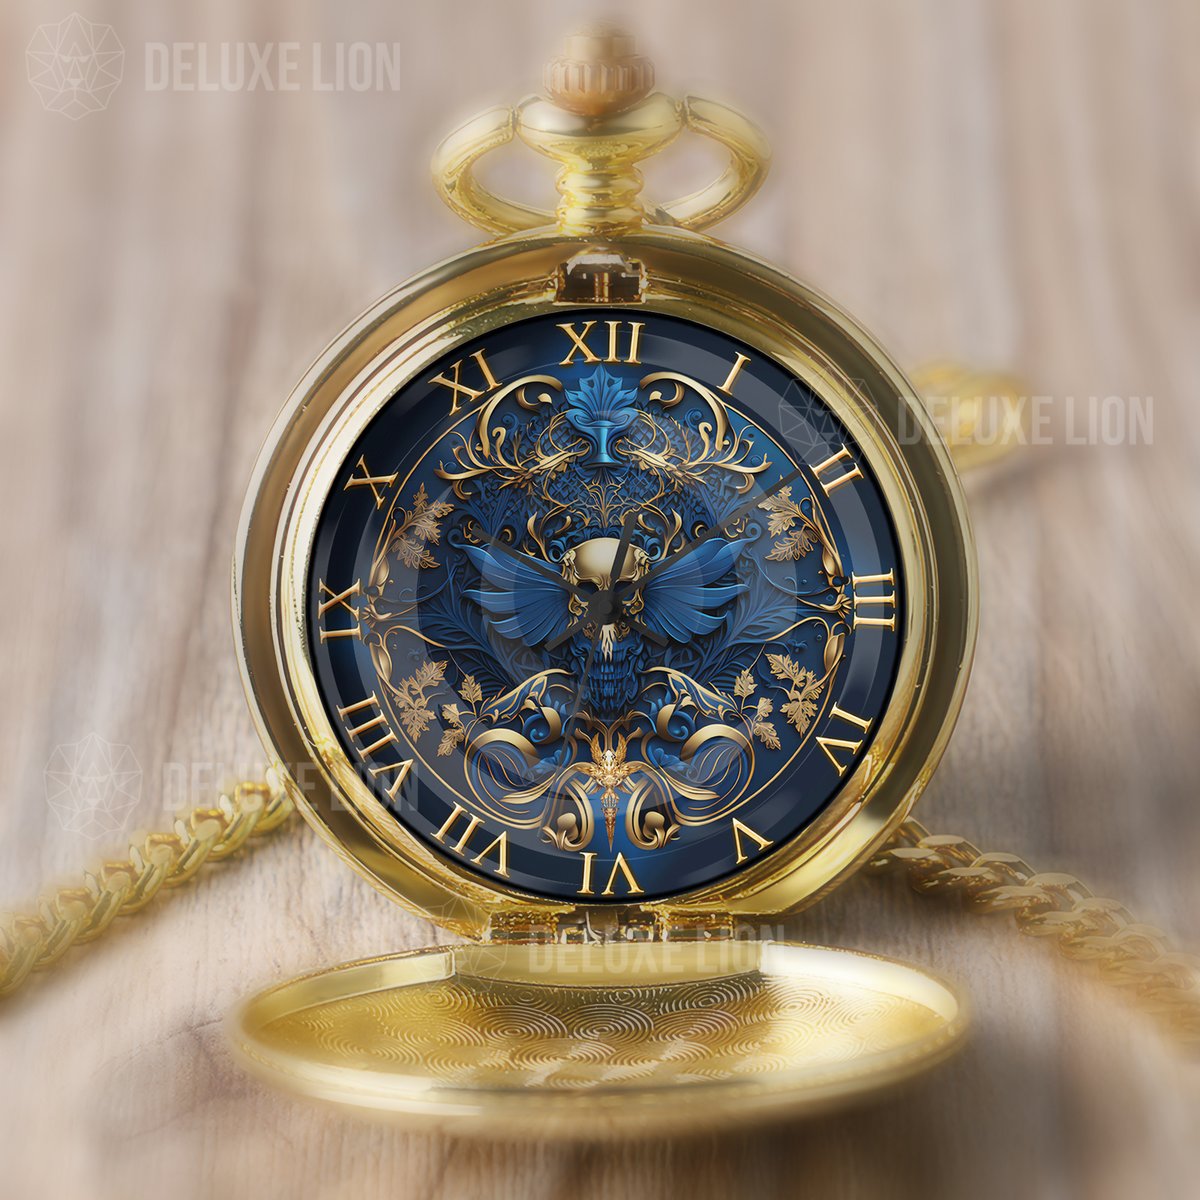 #Skull vintage Blue and Gold Color Pocket Watch zazzle.com/z/ariejult?rf=…
.
.

#watches #watchesofinstagram #luxurywatches #swatches #lovewatches #vintagewatches #instawatches #wristwatches #menswatches #swisswatches #watchessentials #rolexwatches #watchesph #watchesforsale